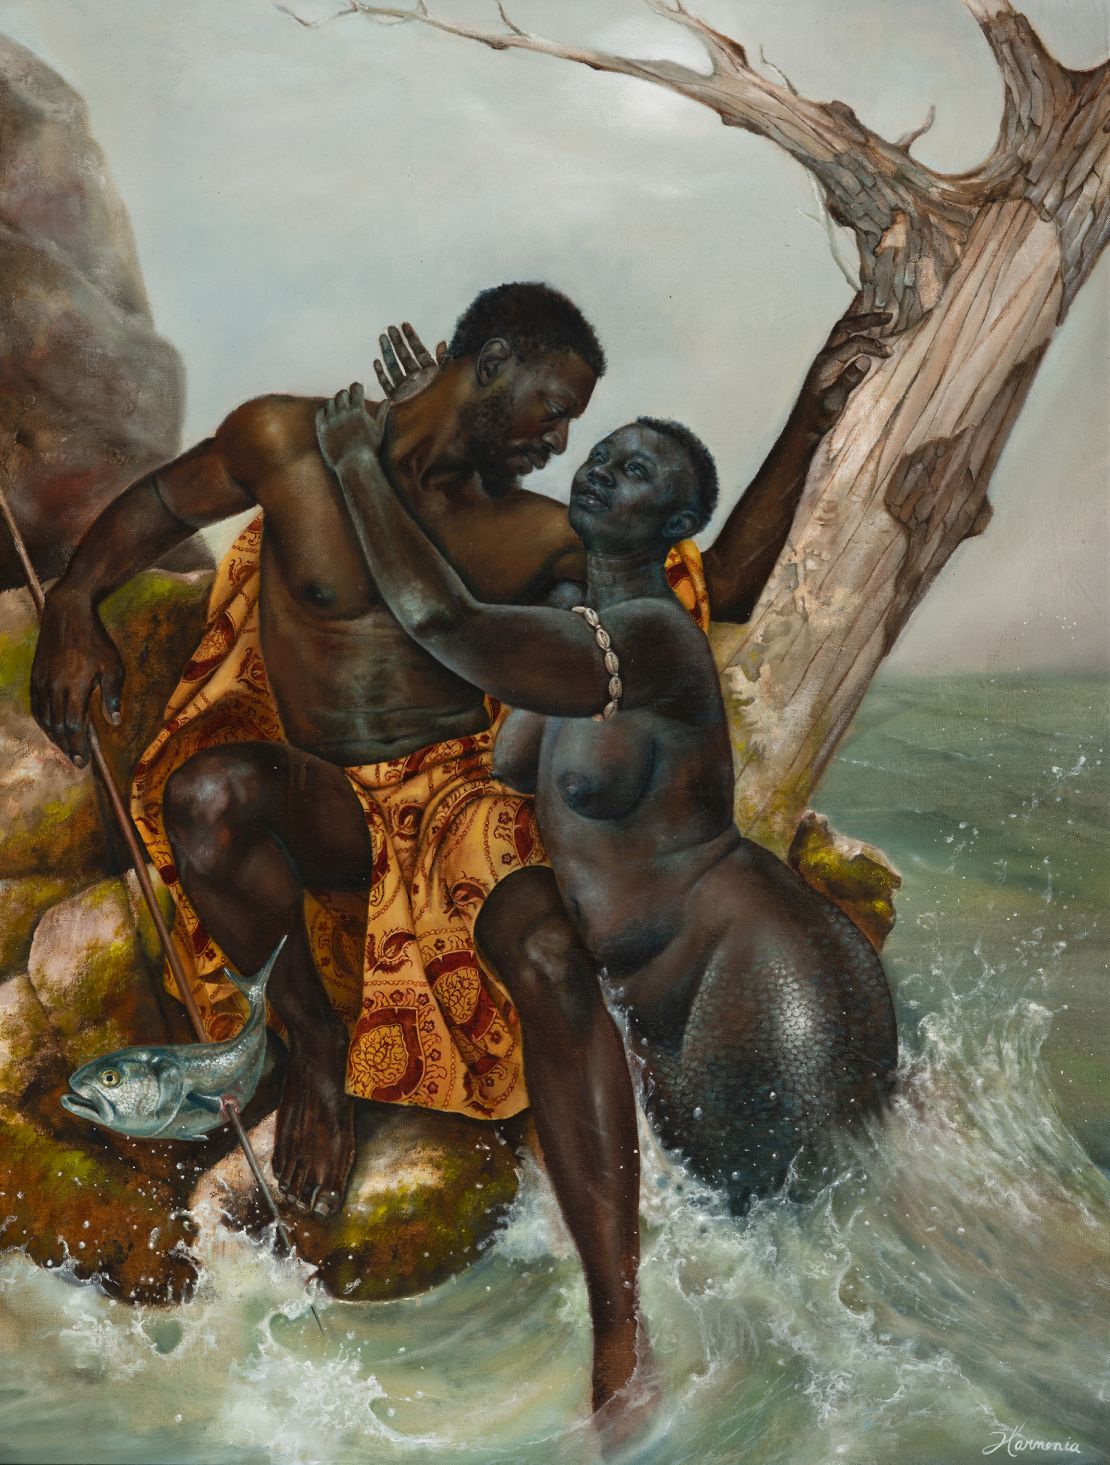 Though Rosales portrays slavery, her paintings also capture the multidimensionality that Black people possess — as in "Yemaya Meets Erinle."